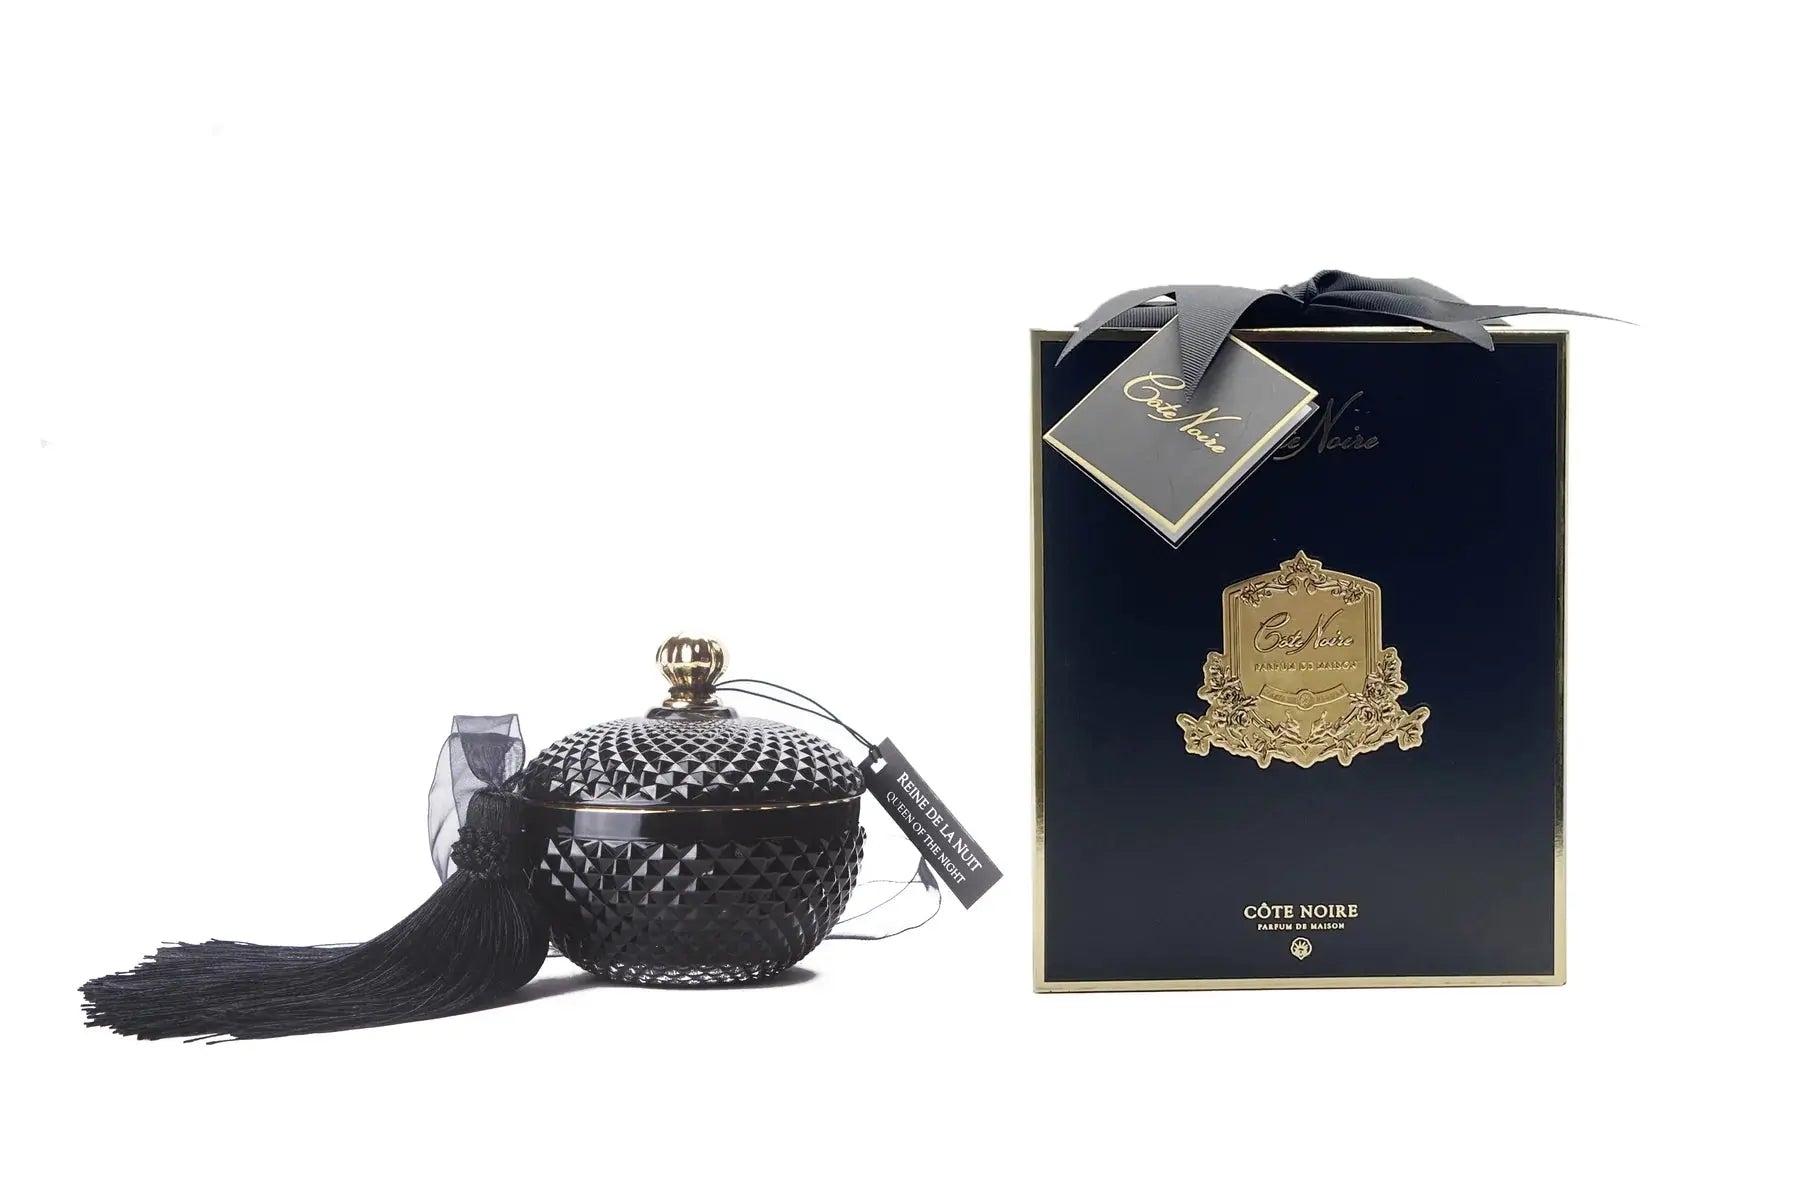 The image features a sophisticated product display with a candle and its accompanying packaging. On the left, there is a black, textured, round candle with a golden top and a long black tassel. Beside the candle is a transparent candle holder. On the right, there is an elegant dark blue box with golden accents and a black ribbon. The box and the candle have matching branding that includes intricate golden designs and text that enhances the luxurious feel of the product.